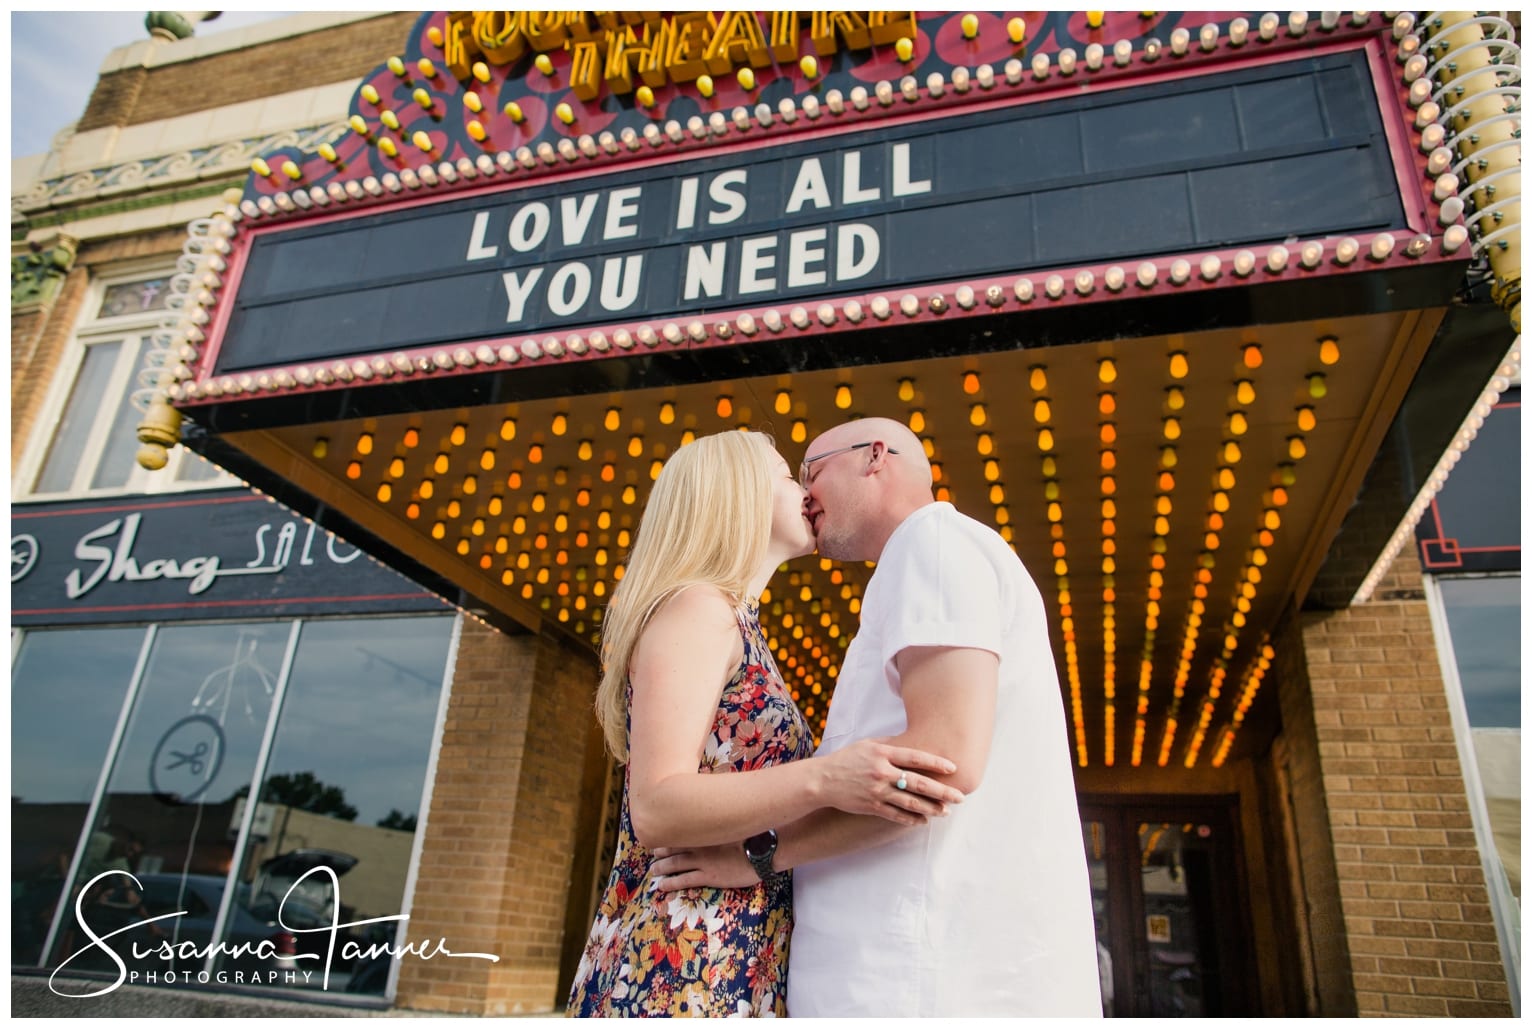 Fountain Square Indianapolis Photography Engagement Session Couple in front of Fountain Square theatre. Marquee reads "Love is all you need"